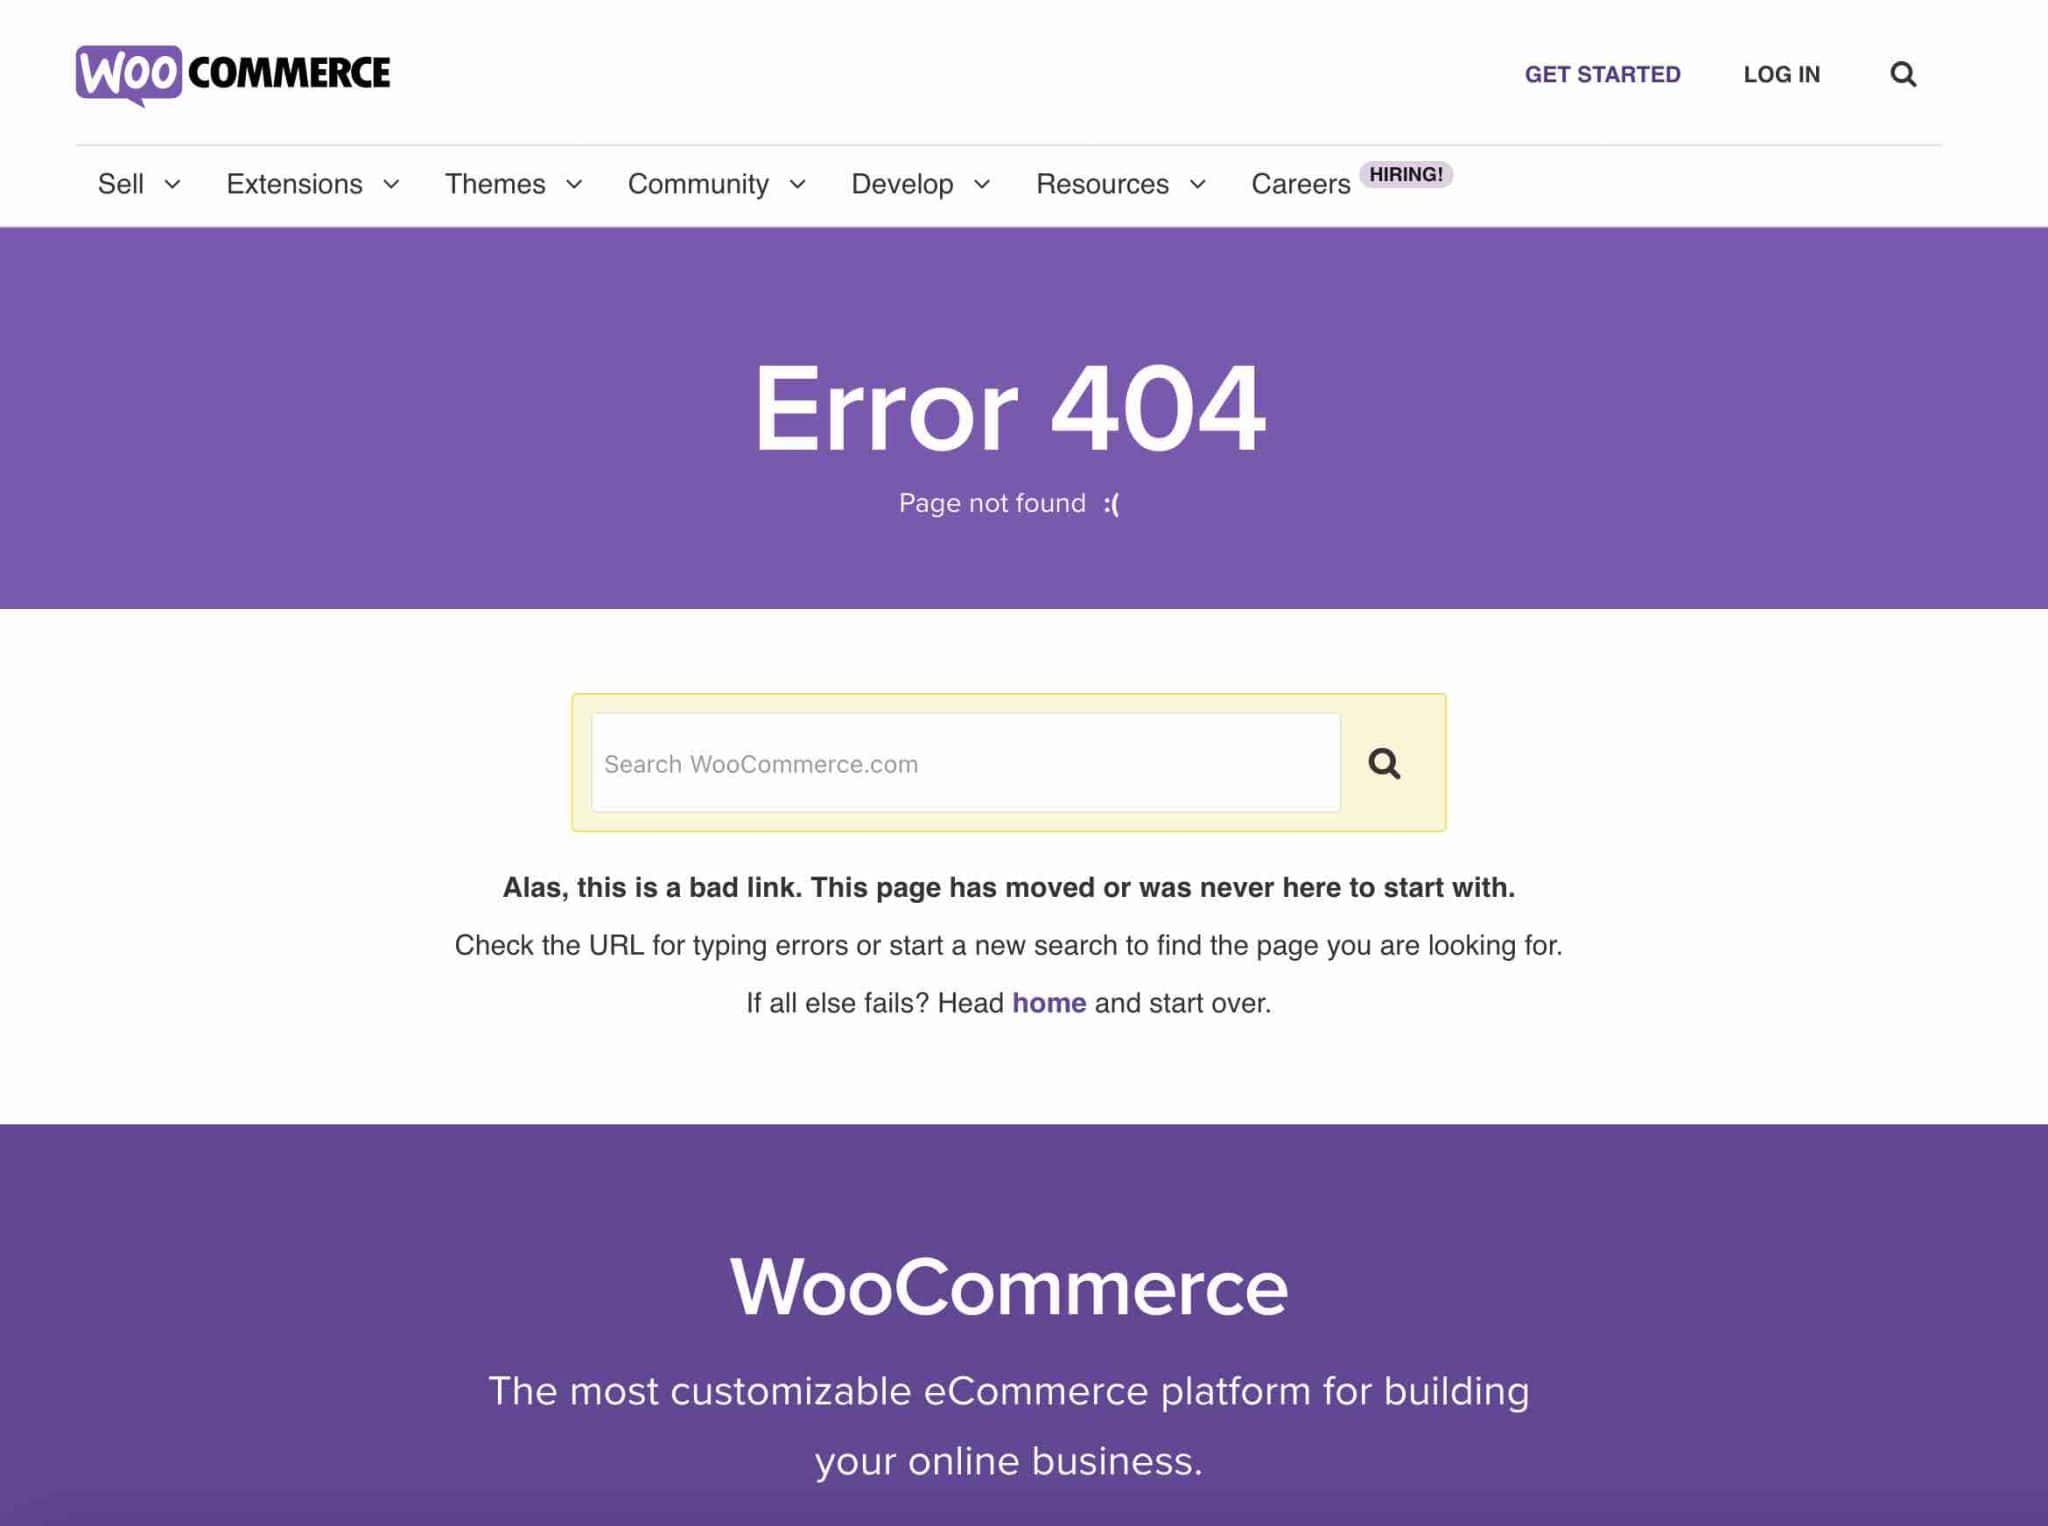 A 404 error page on WooCommerce.